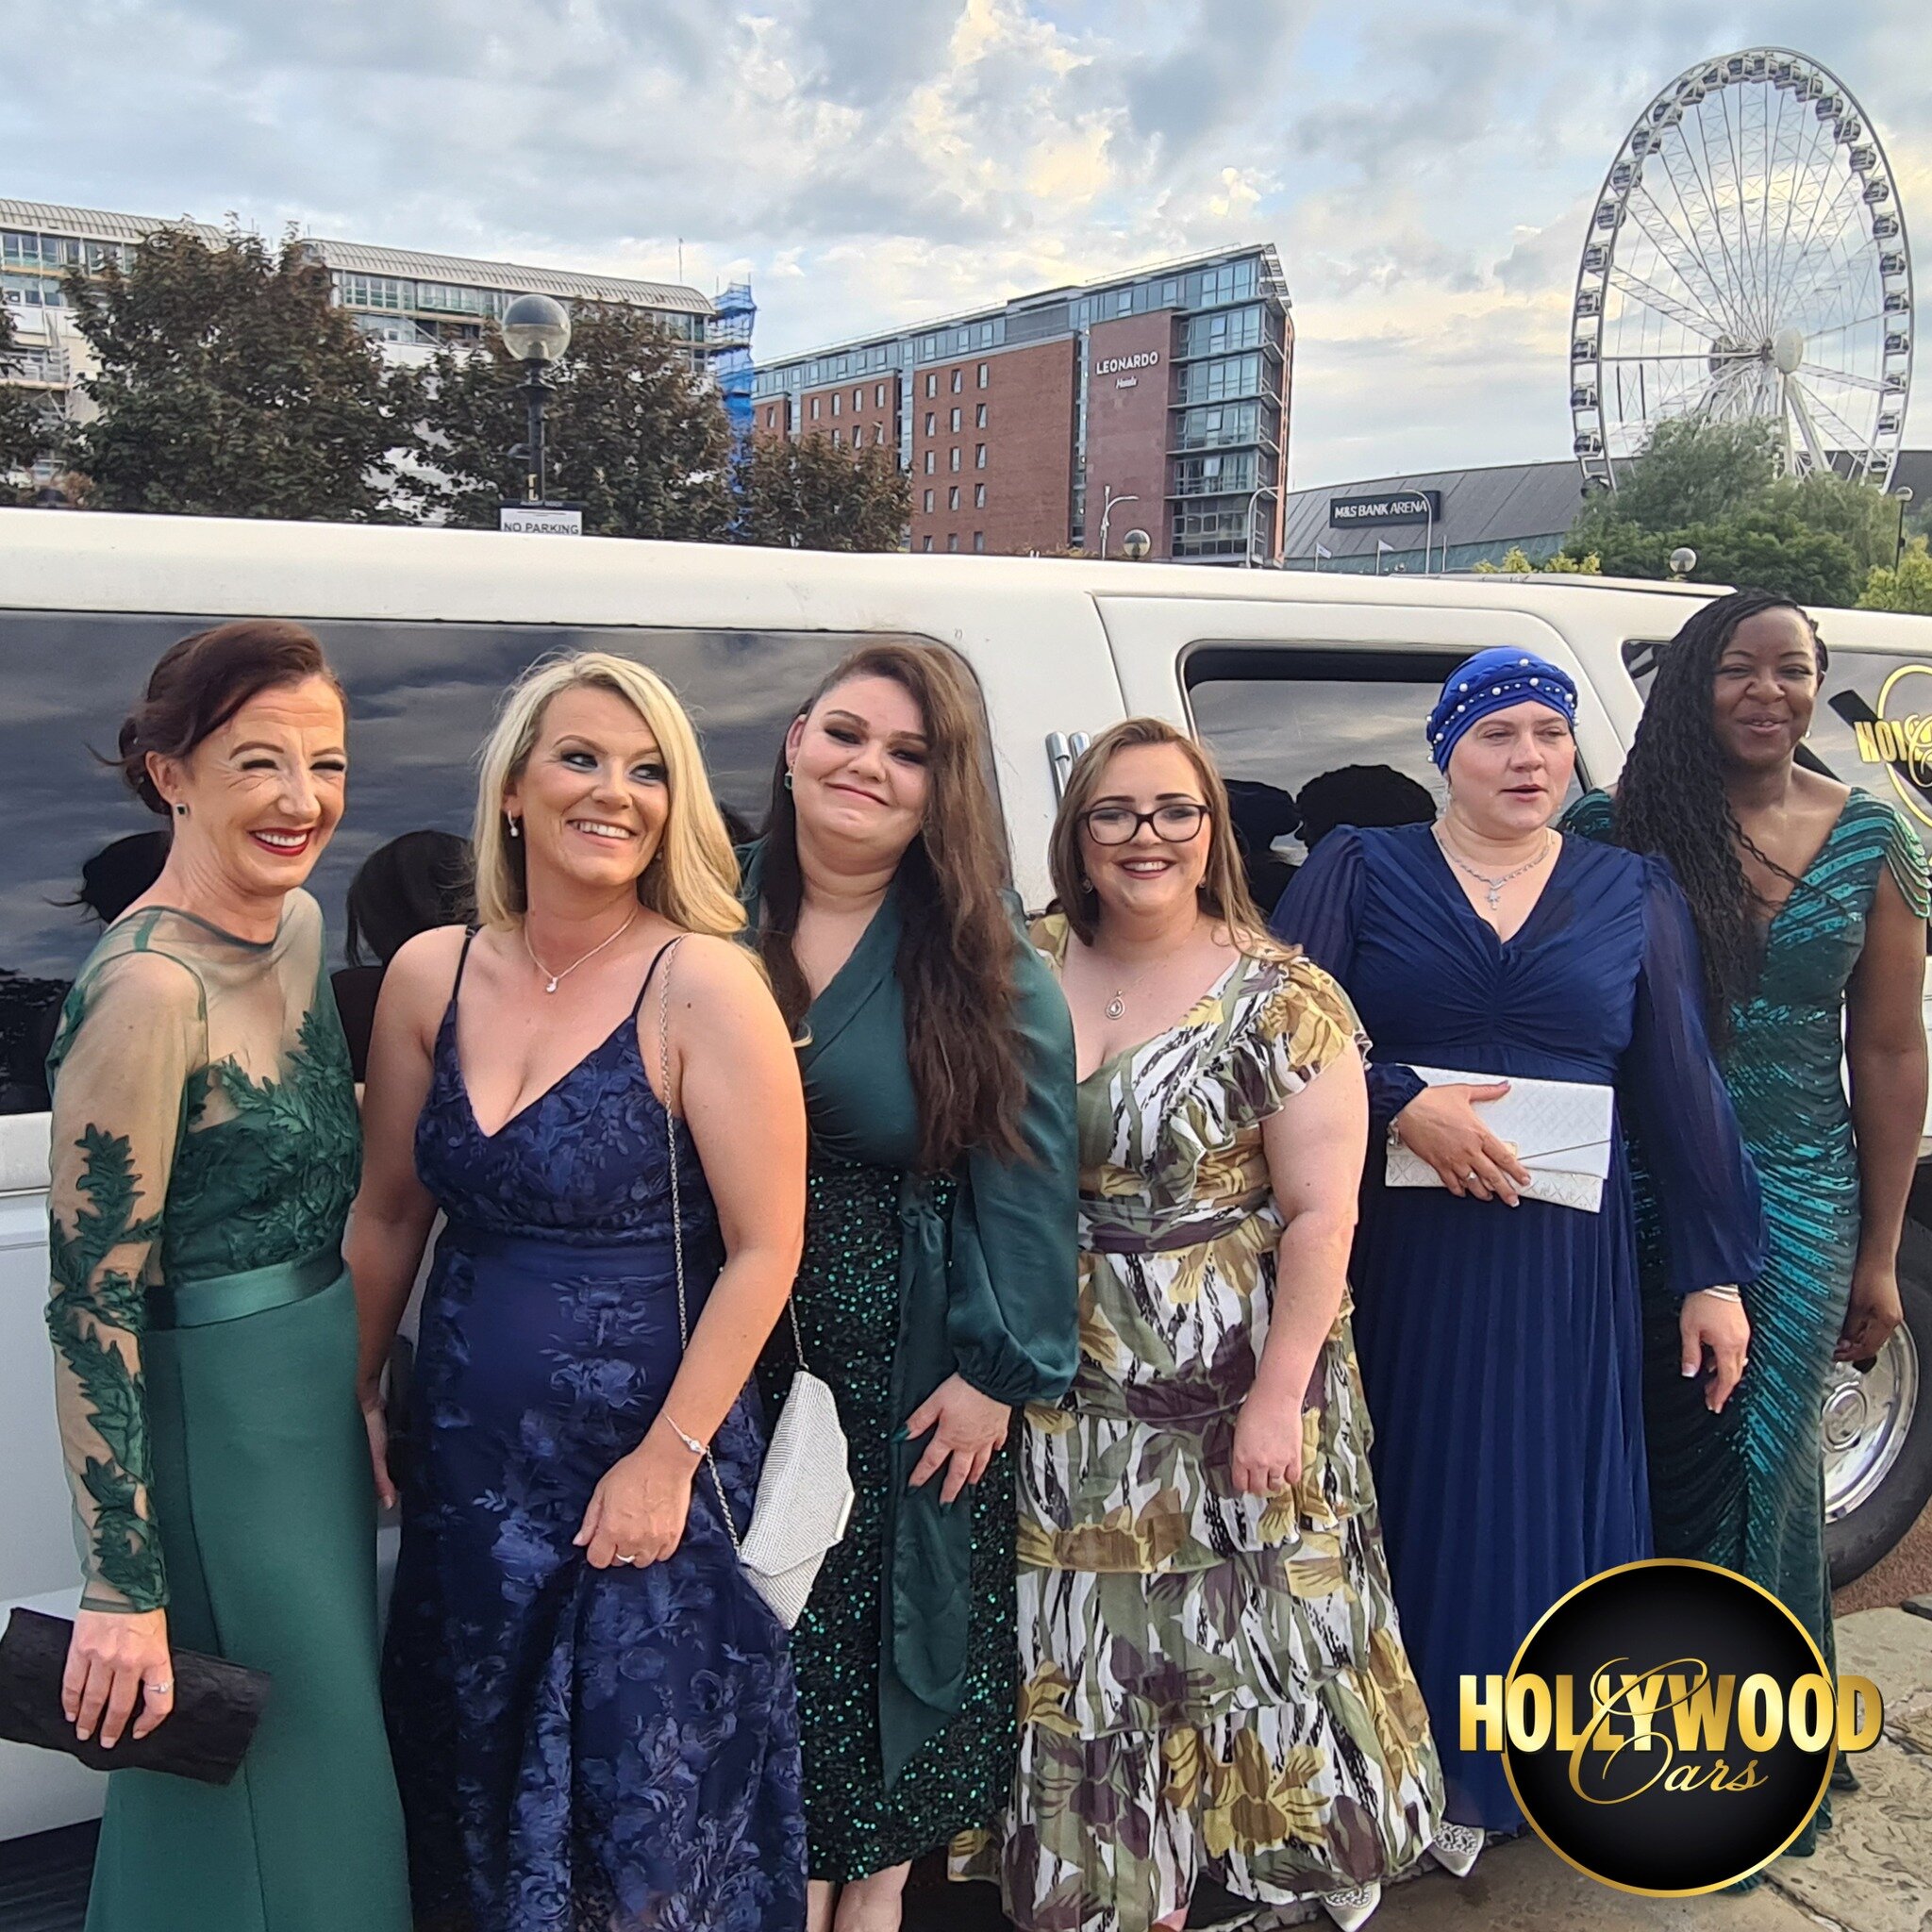 @TheSPACEGroupManchester looking fabulous beside our limousine ✨✨✨
Why not send us an enquiry now at www.hollywoodcars.co.uk?

#party #partybus #limo #limohire #LuxuryTravel
#liverpool #drinks #partytime #music #love #dj
#wedding #nightlife #photogra